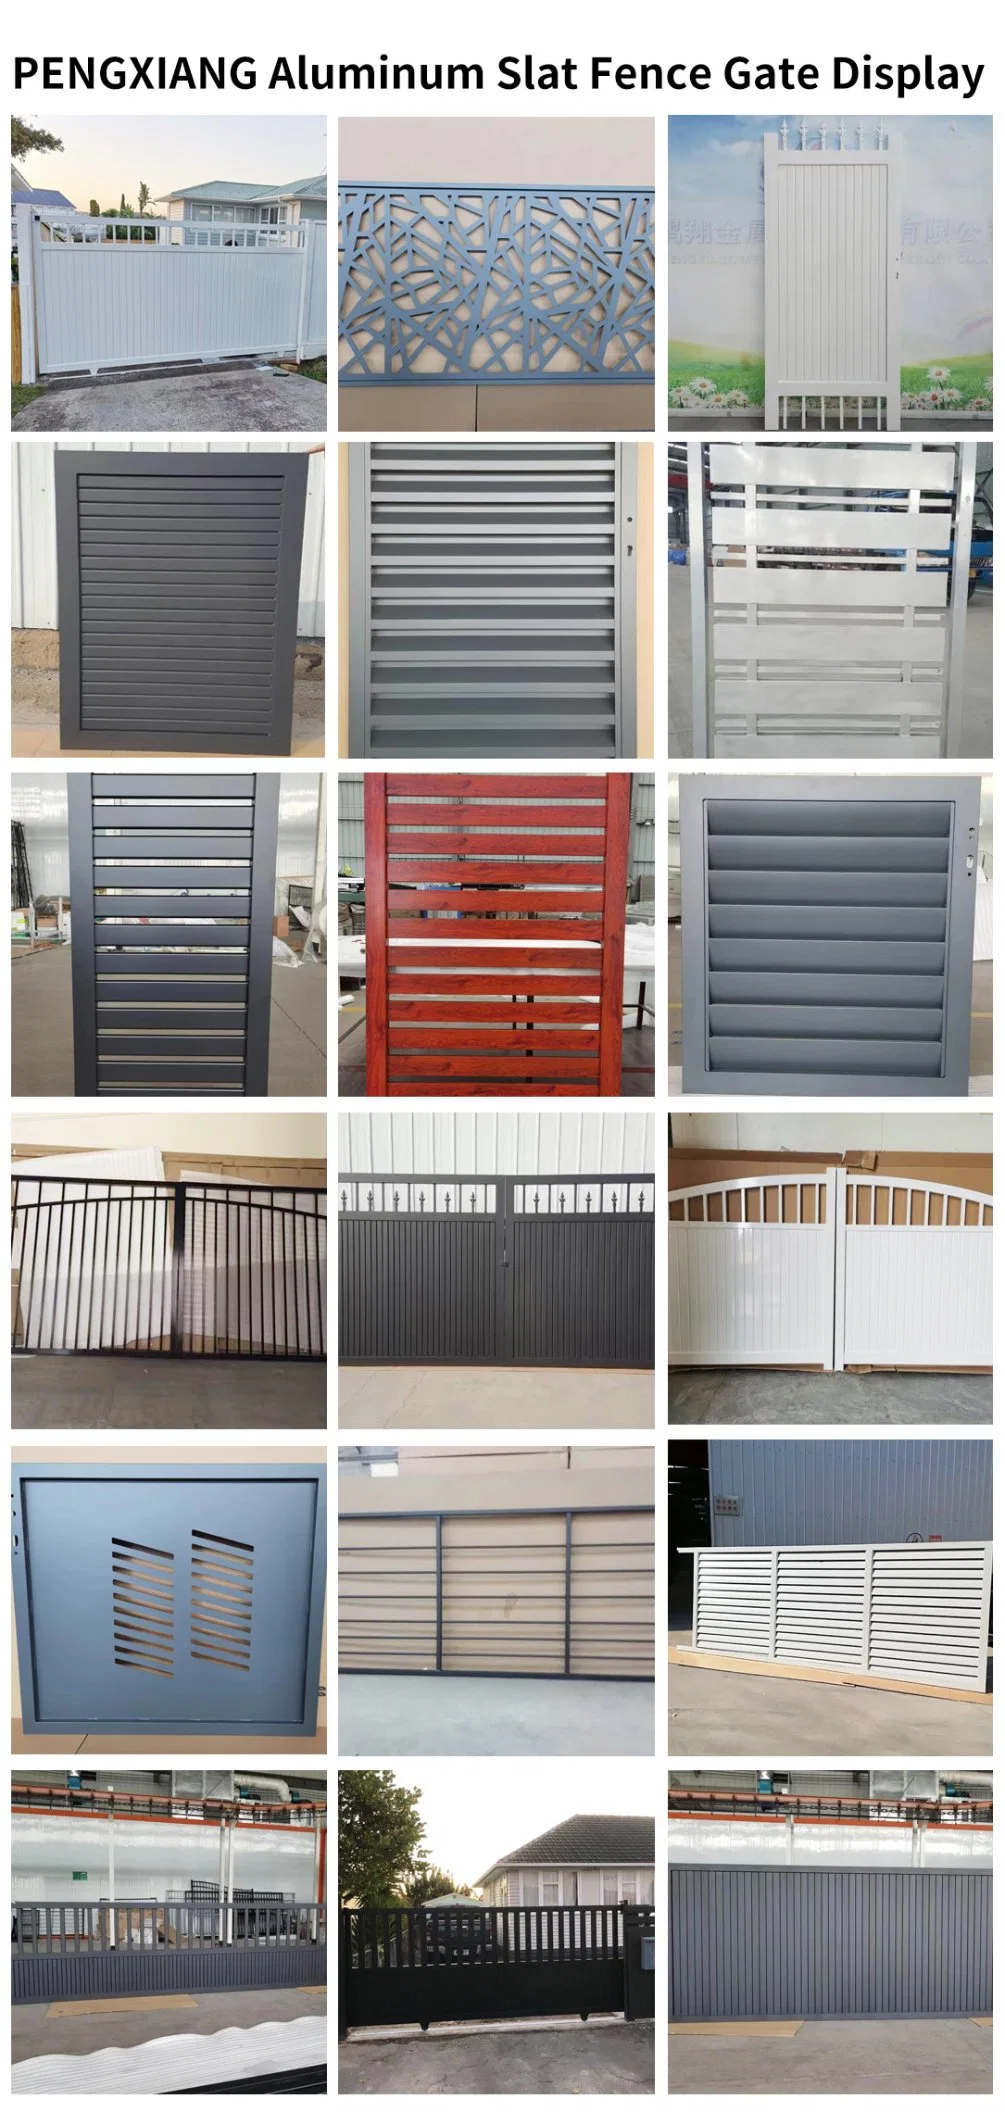 Affordable Durable Ornamental Fencing Steel Rackable Fence Panel Versai Residential/Commercial/Industrial Grade Security Fence with 10years Warranty